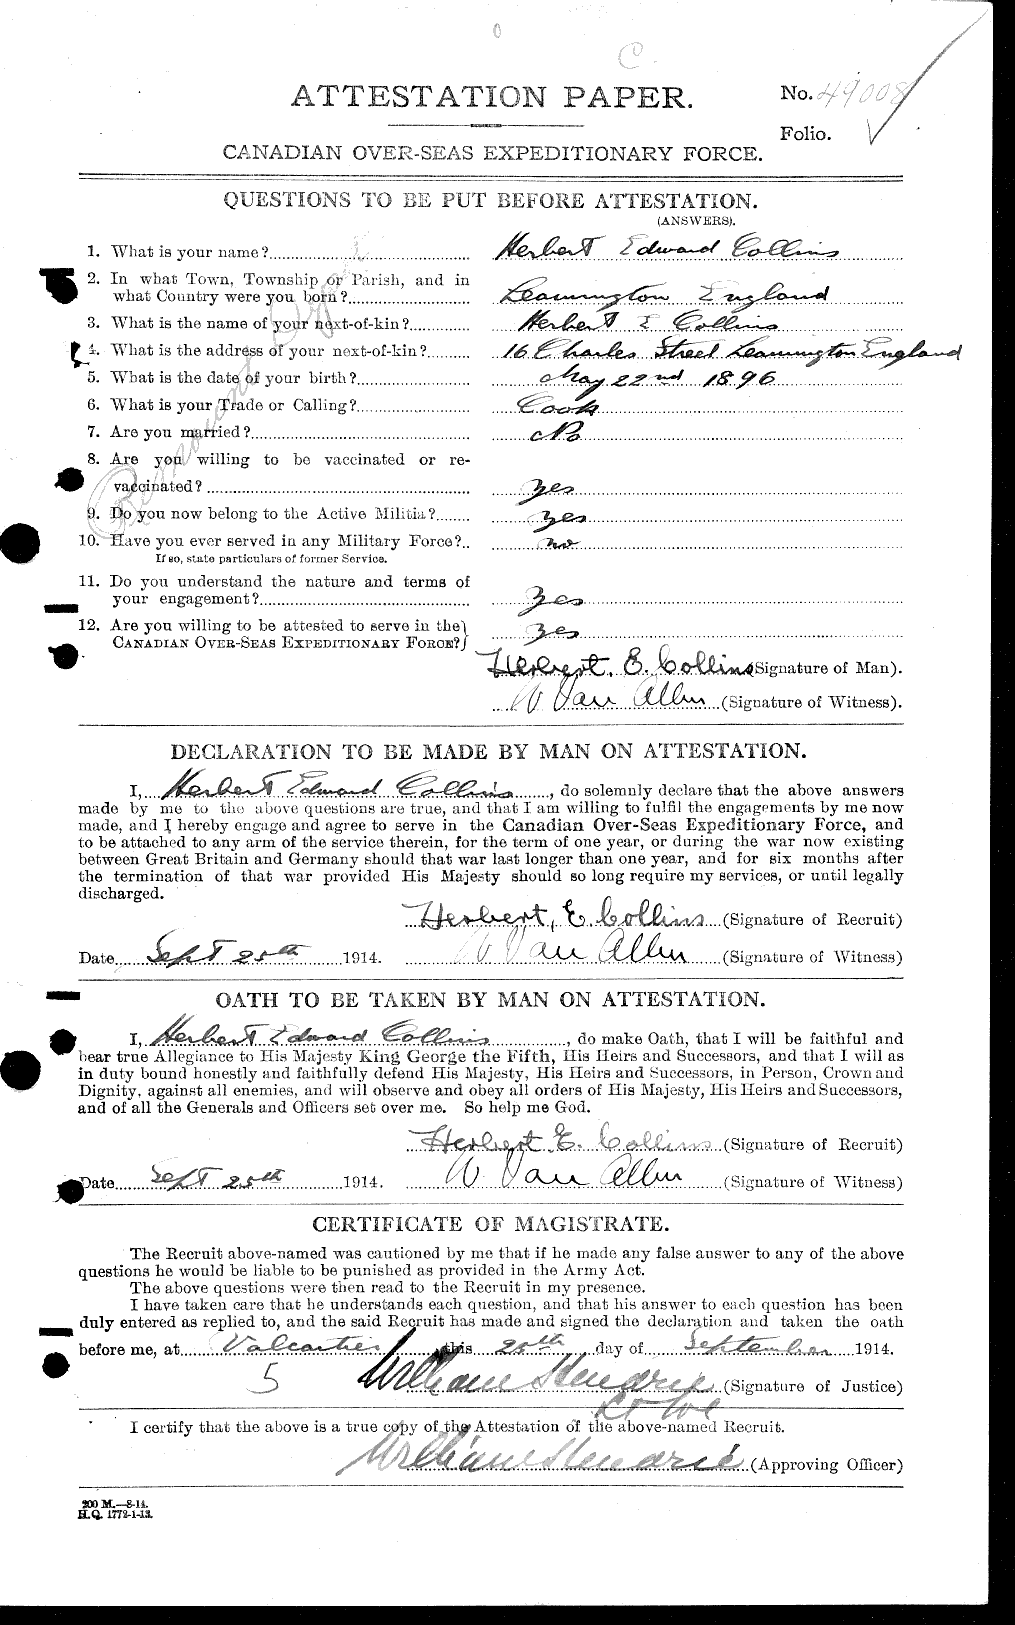 Personnel Records of the First World War - CEF 042304a